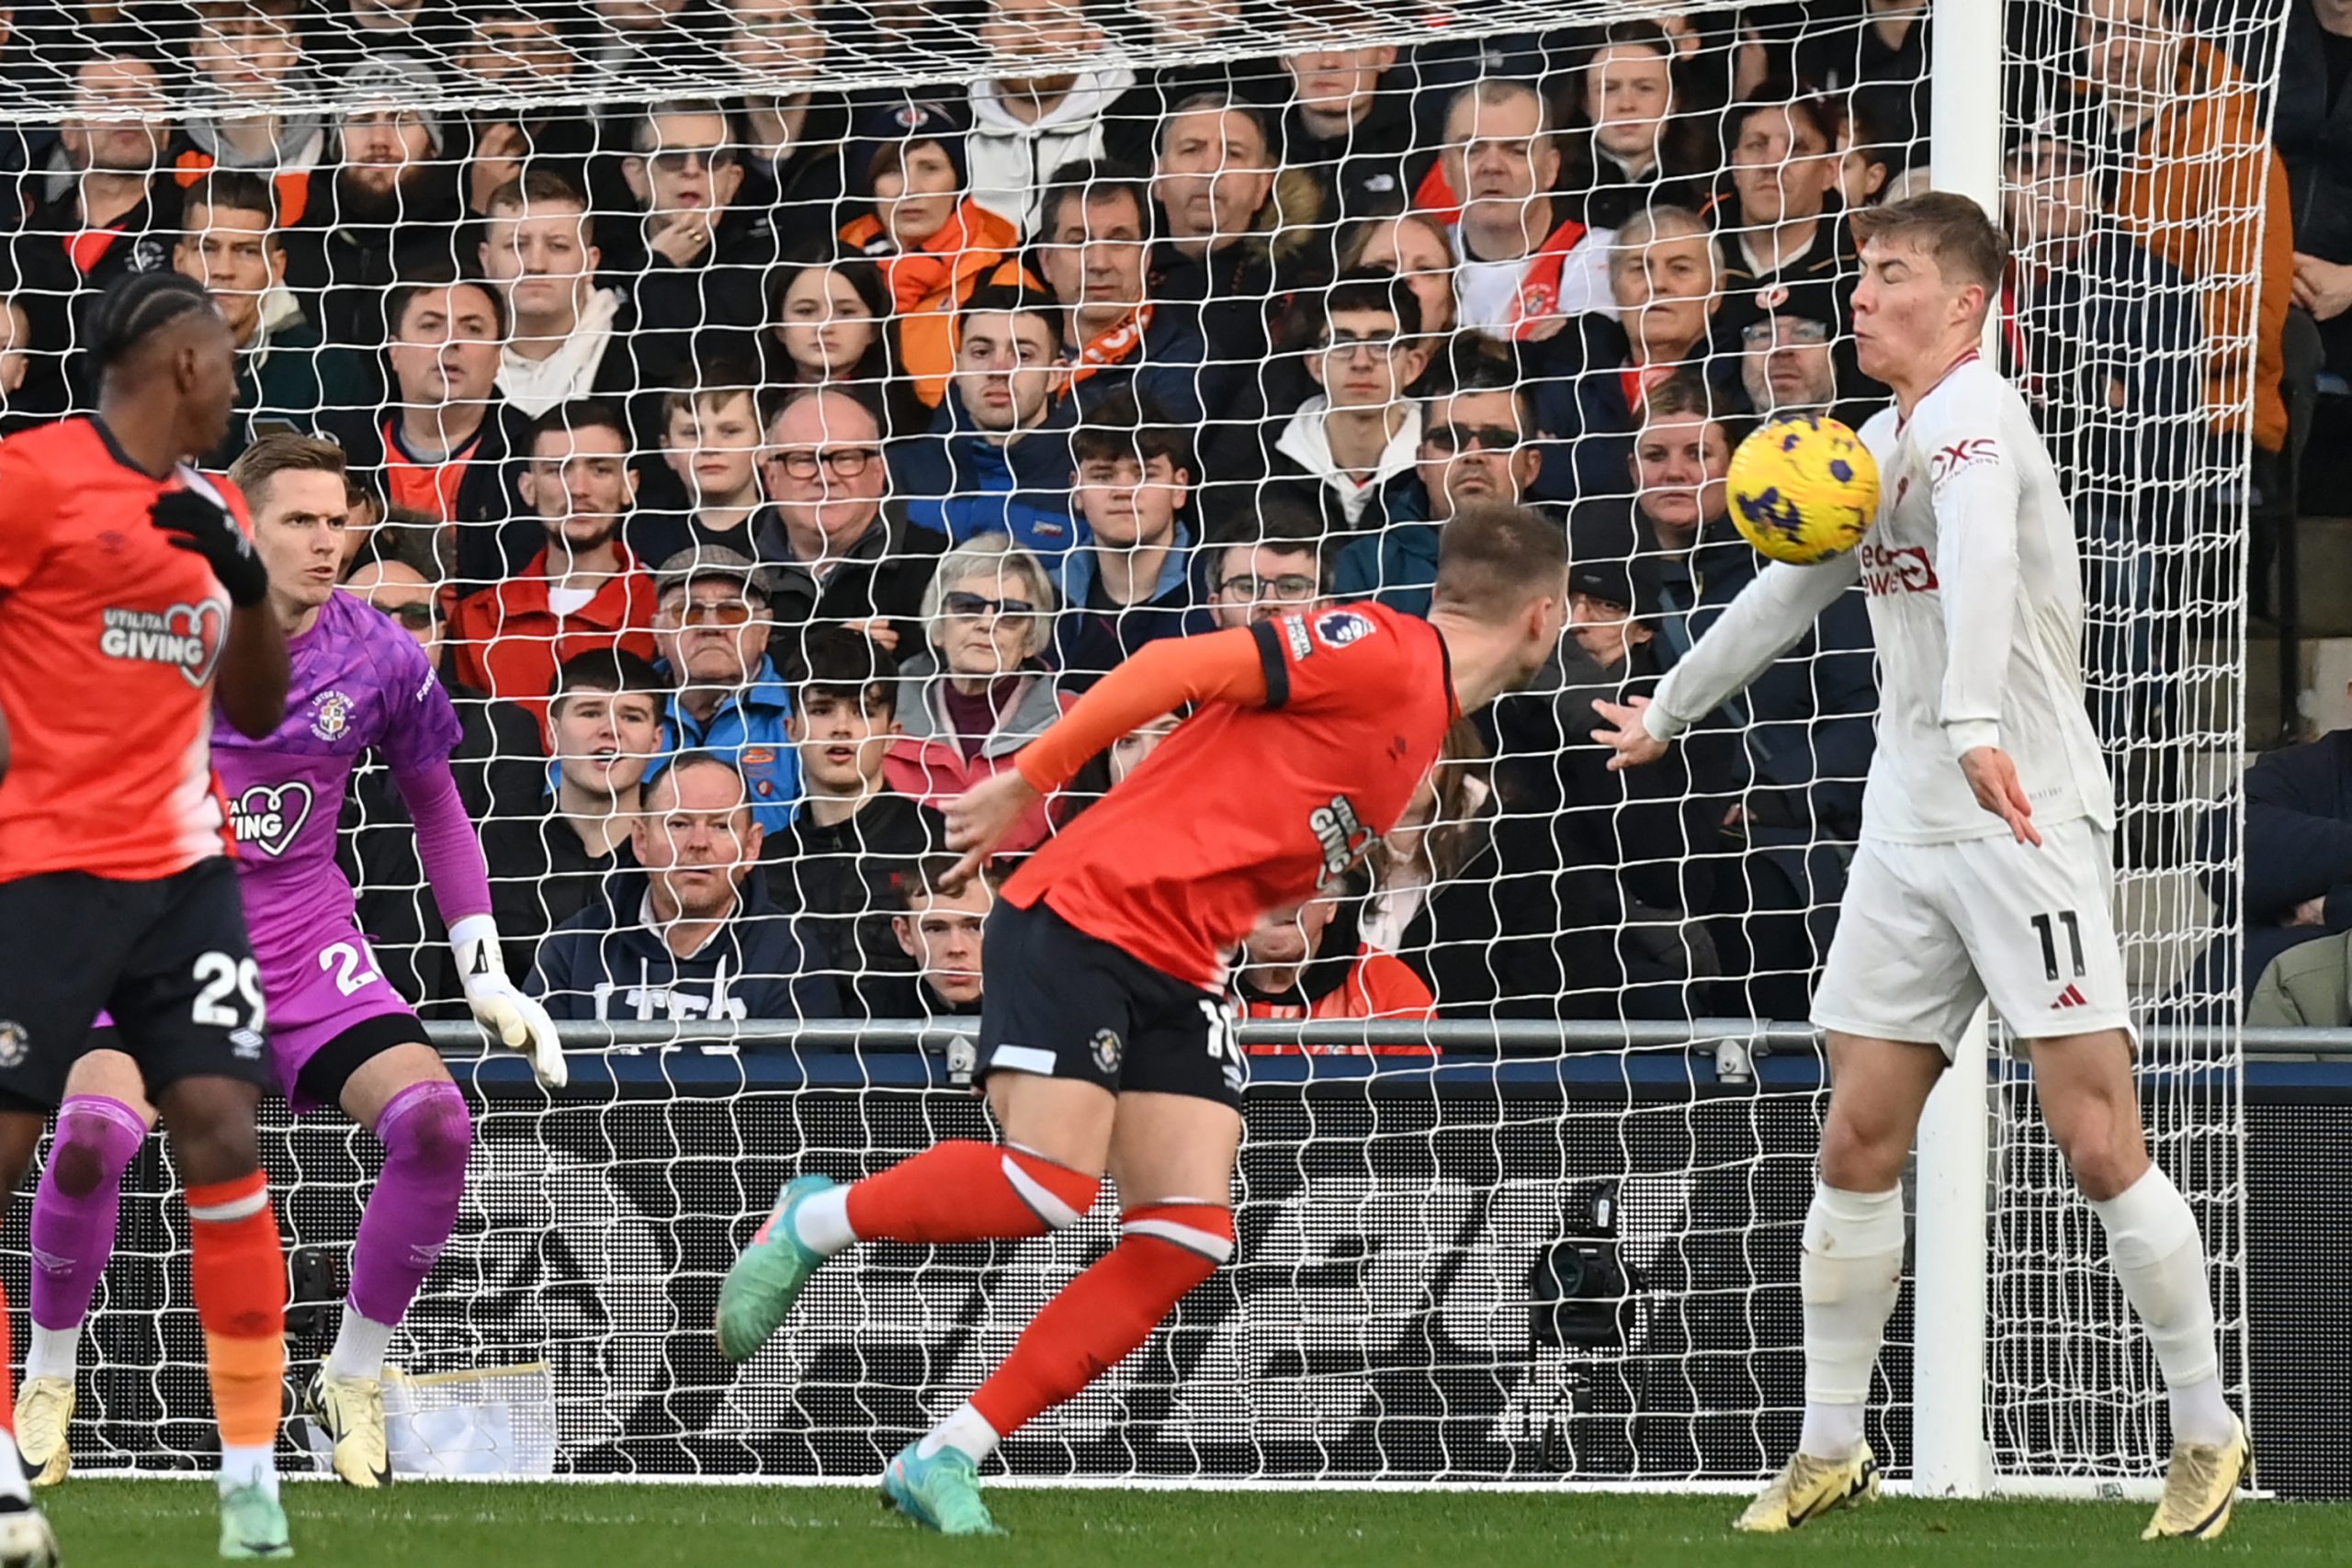 Rasmus Hojlund has answered whether Manchester United's second goal vs Luton Town was a lucky touch or a calculated strike.